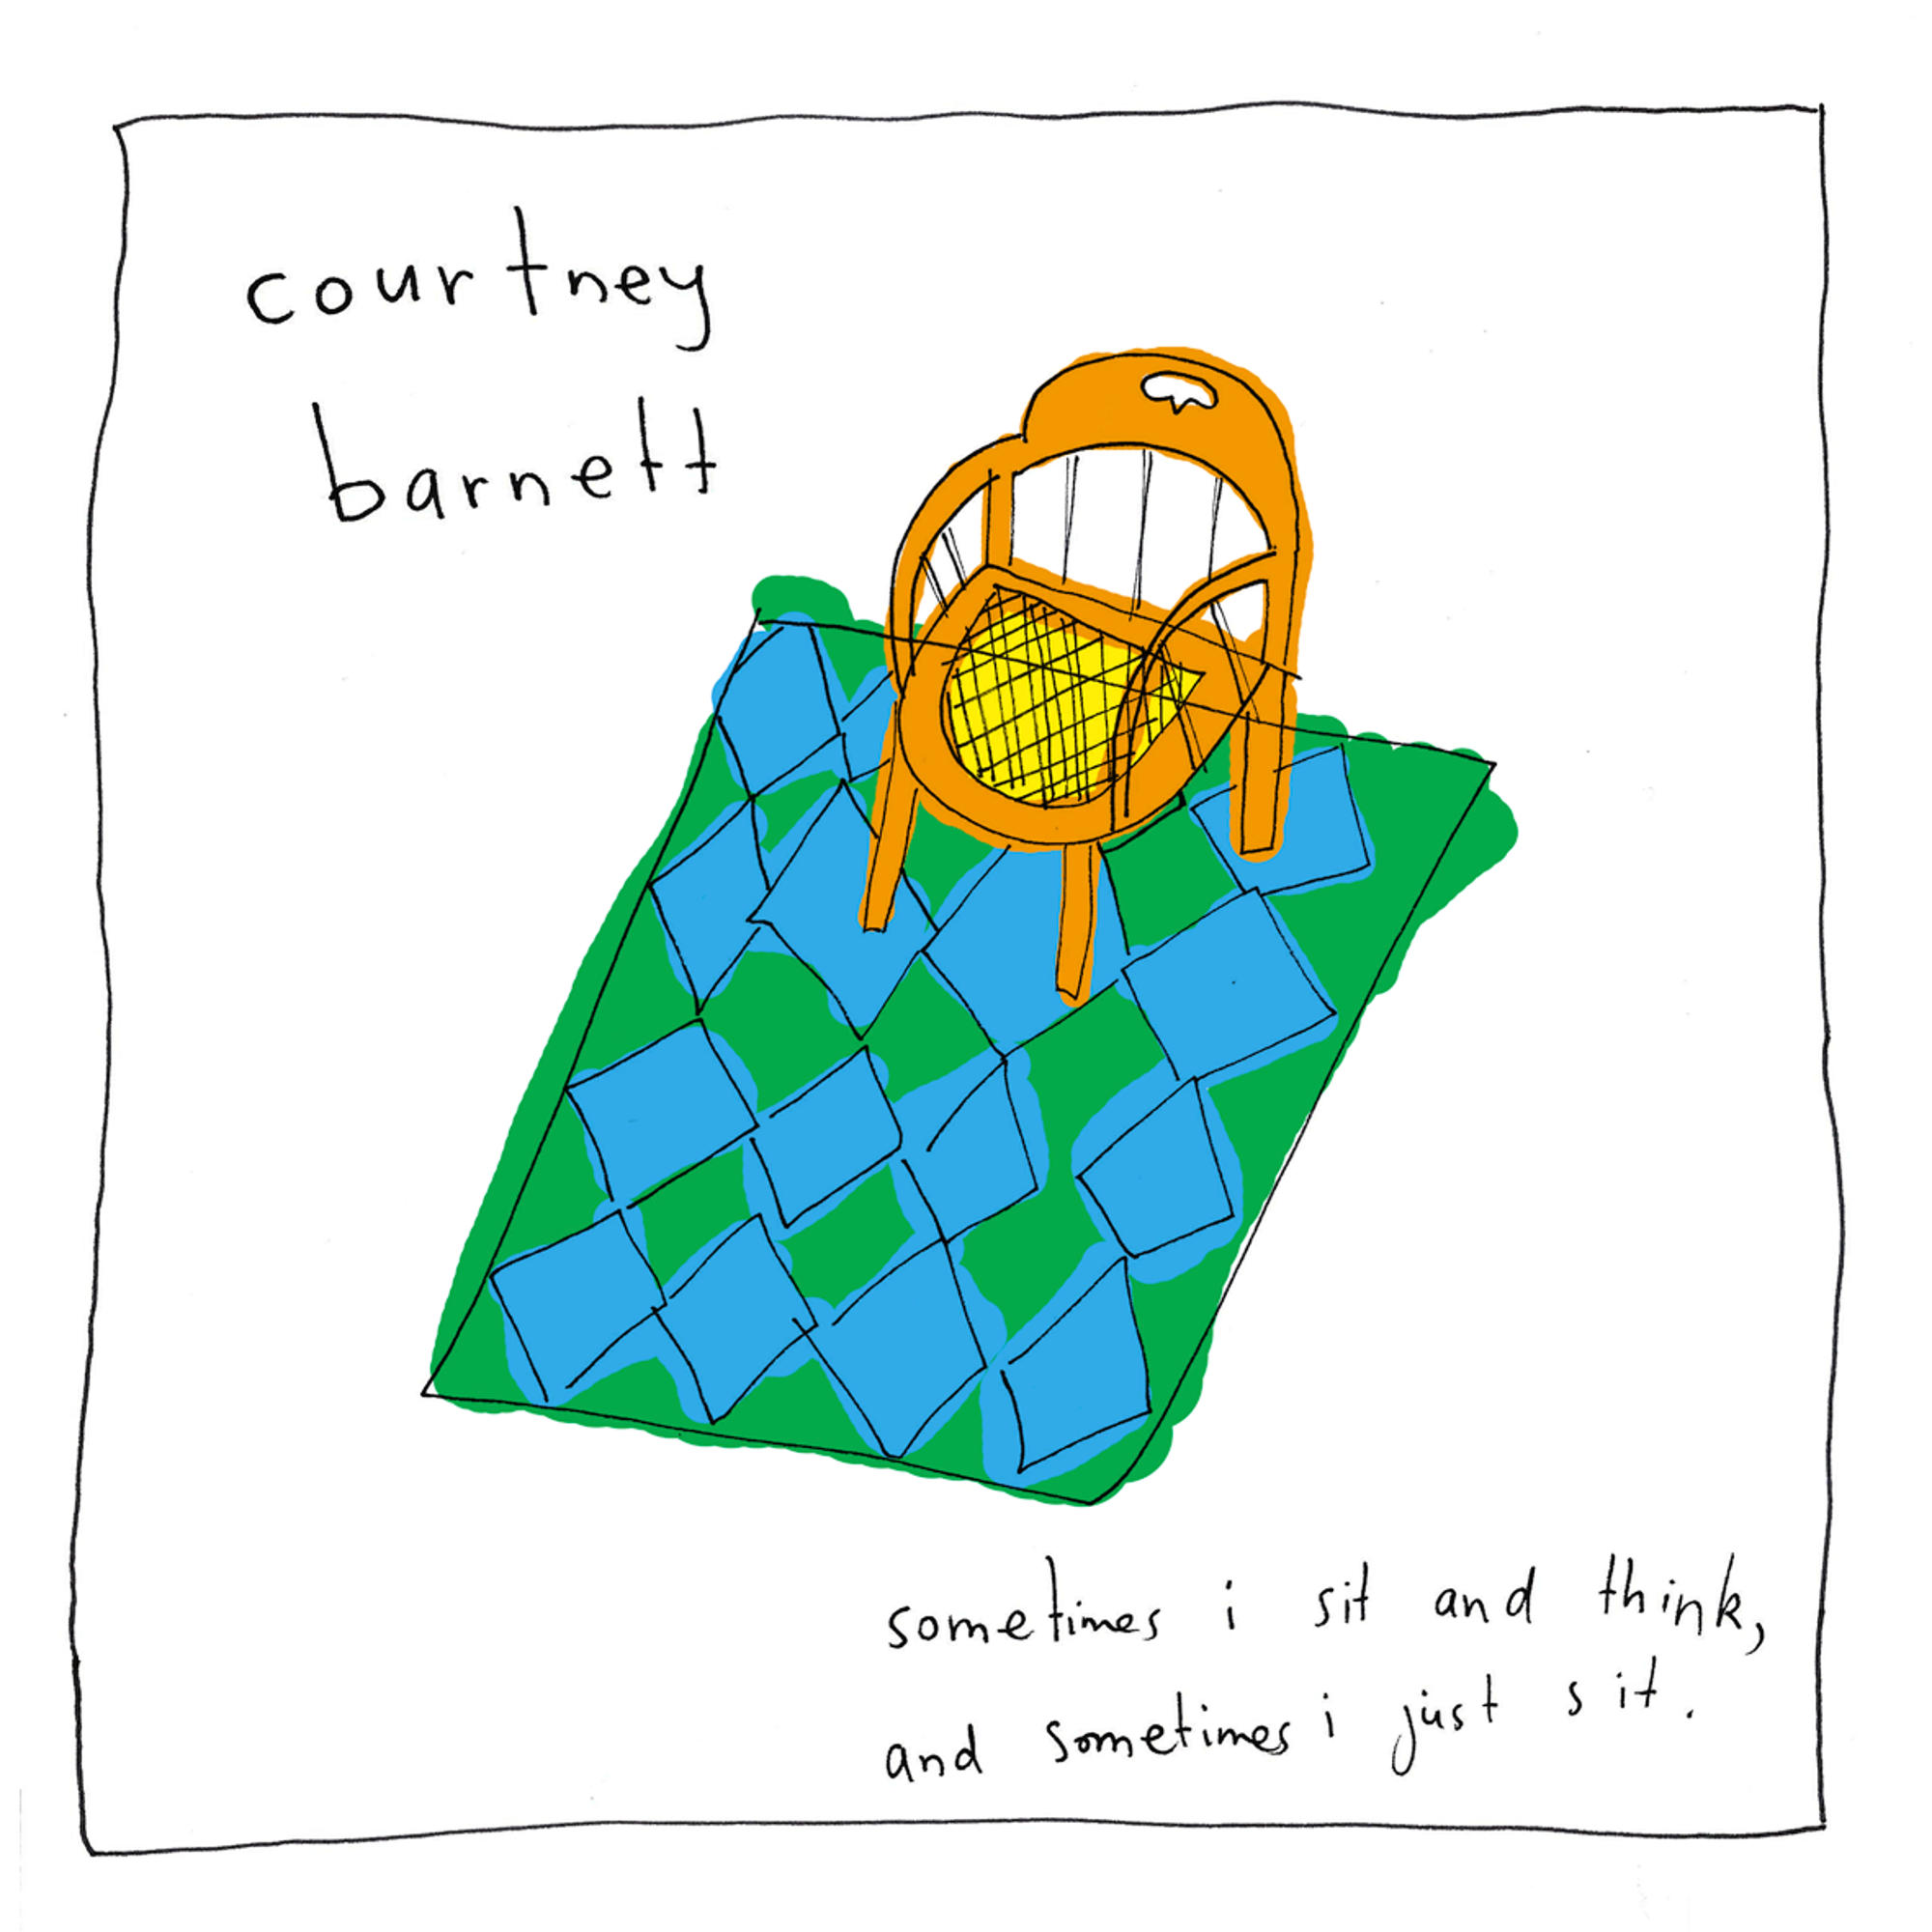 Courtney Sometimes And Sit - - I And Sometimes...(Lp+Mp3) Barnett (Vinyl) Think,